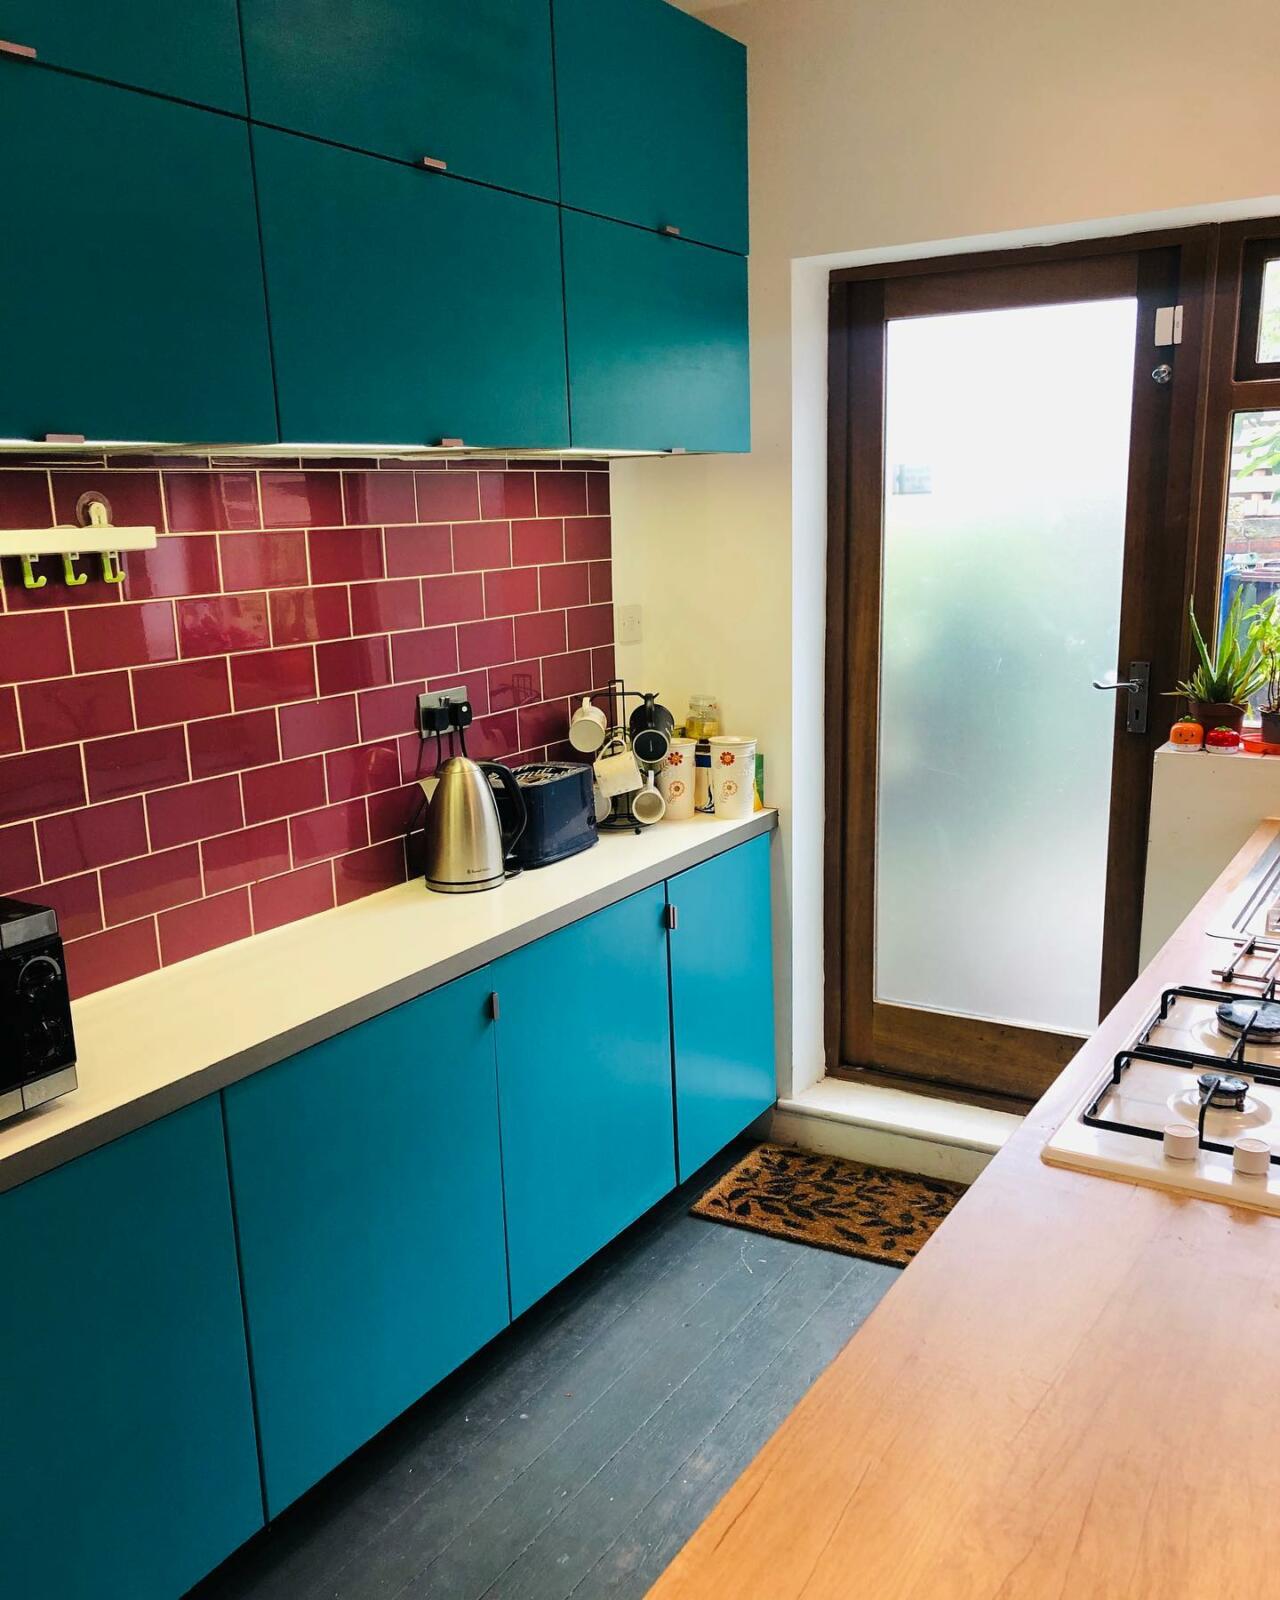 A kitchen with turquoise tiled walls.